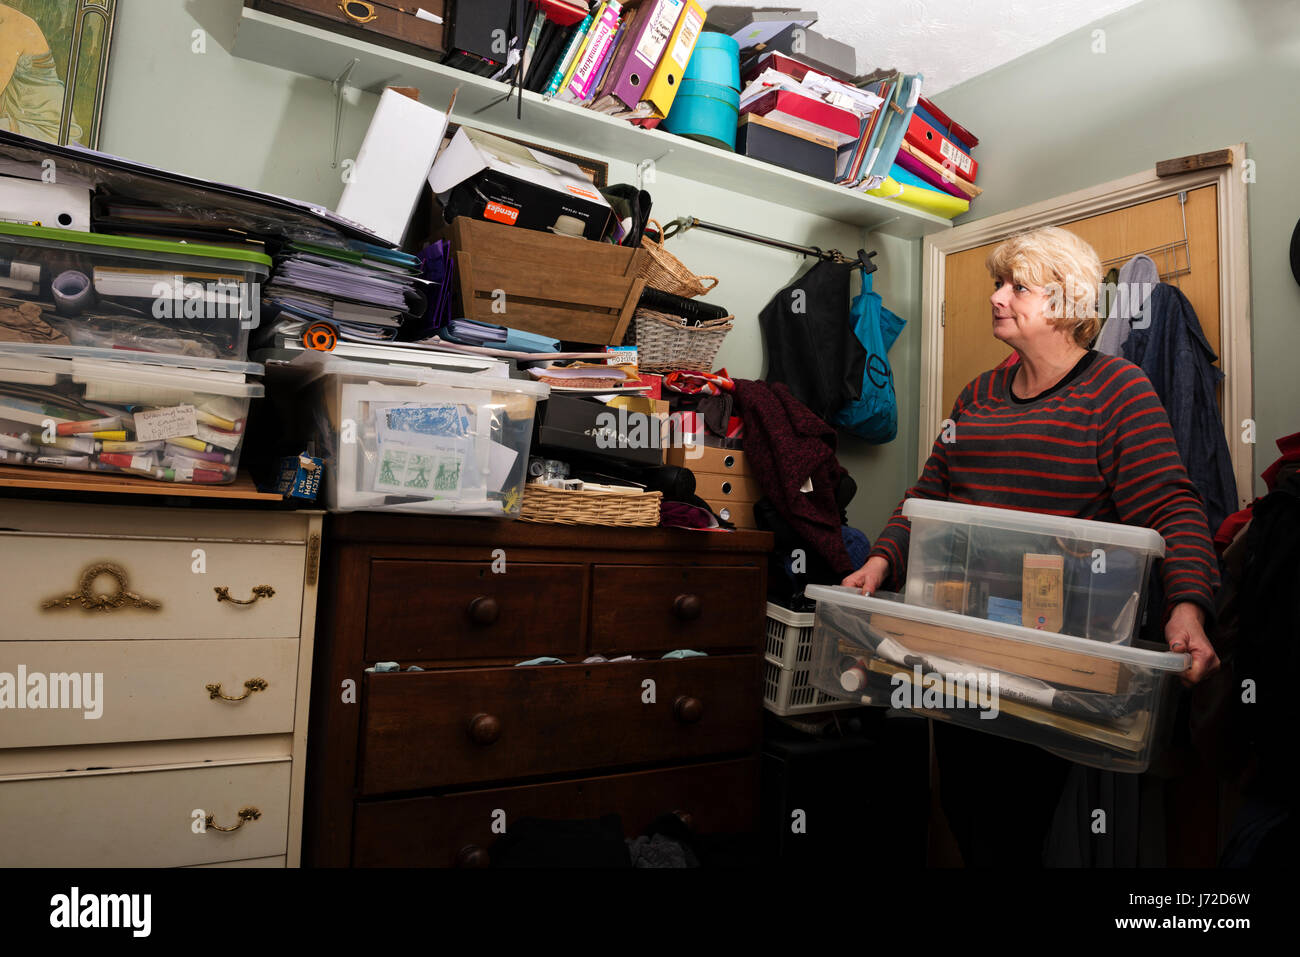 Woman with a cluttered bedroom Stock Photo